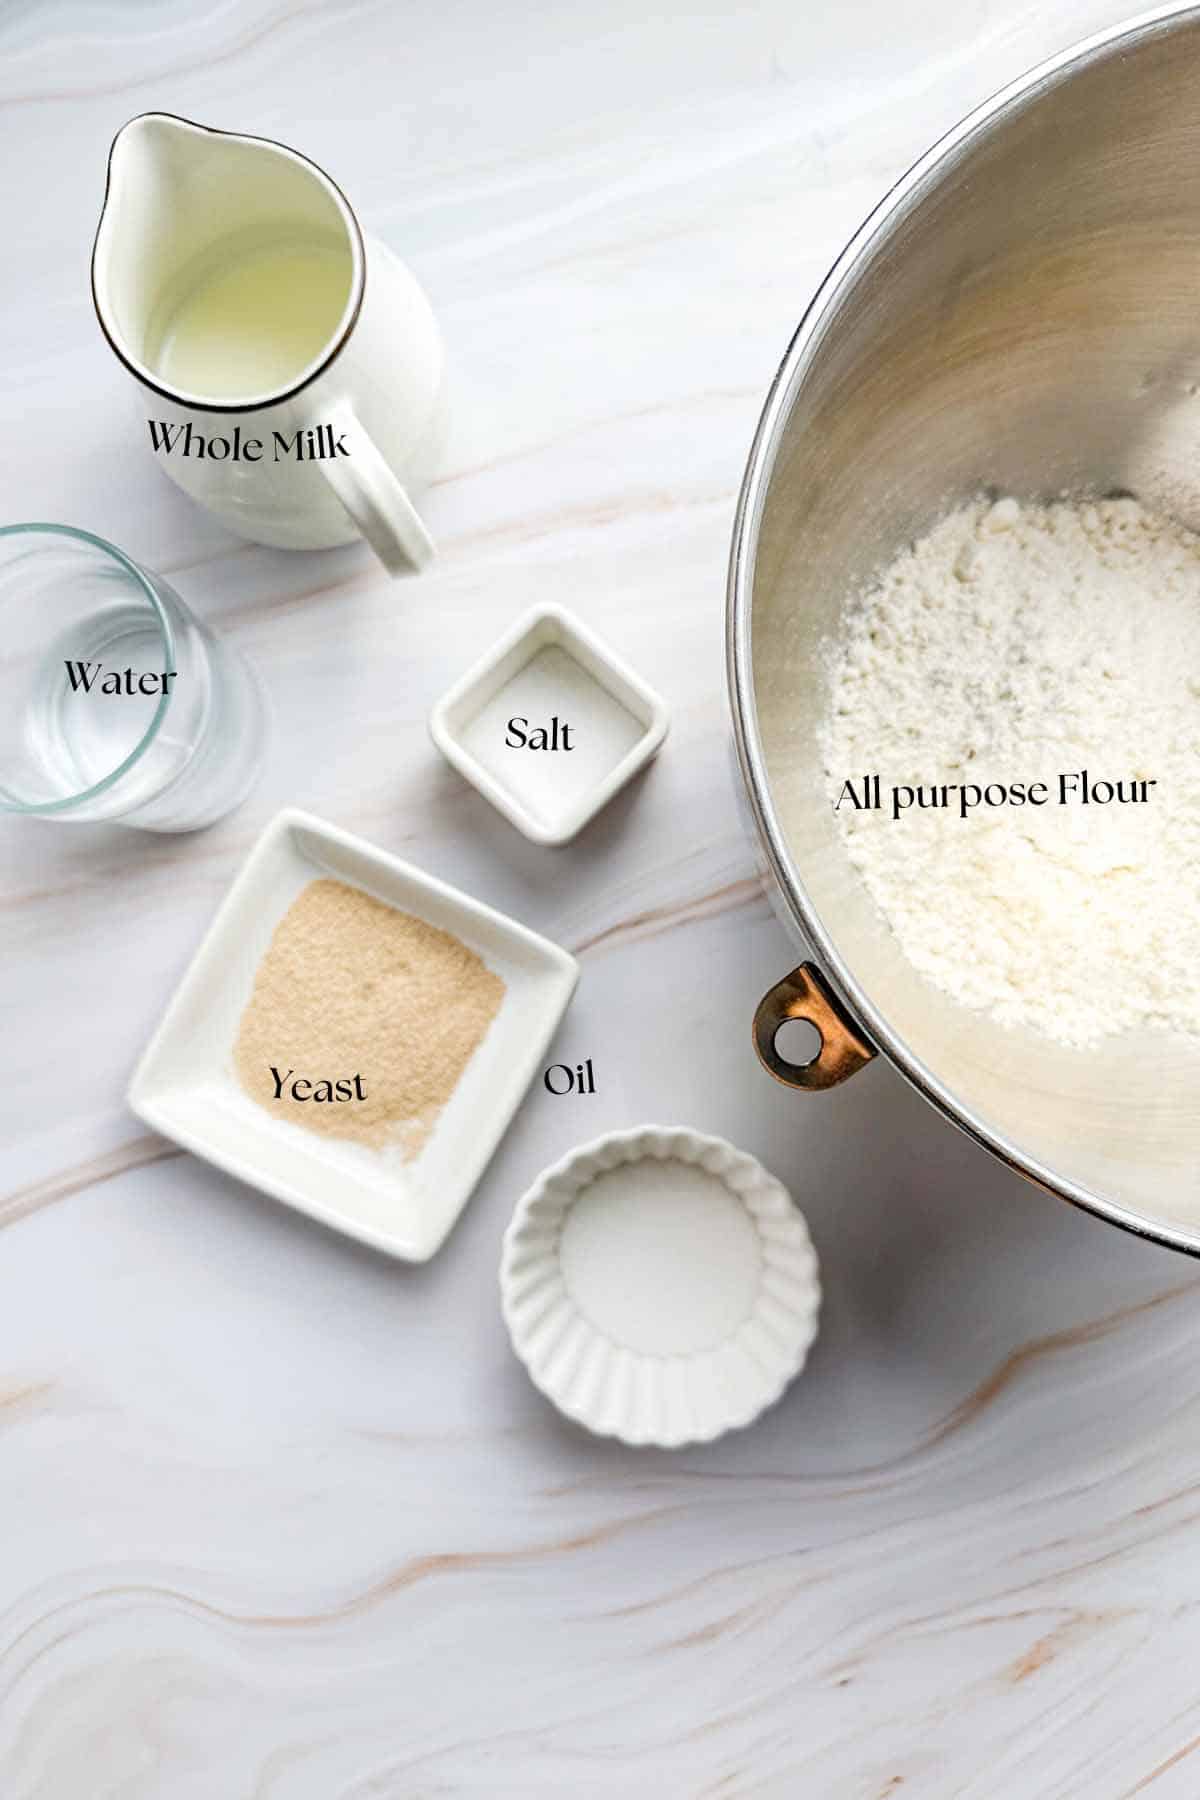 image showing all the ingredients required for making the garlic bread dough